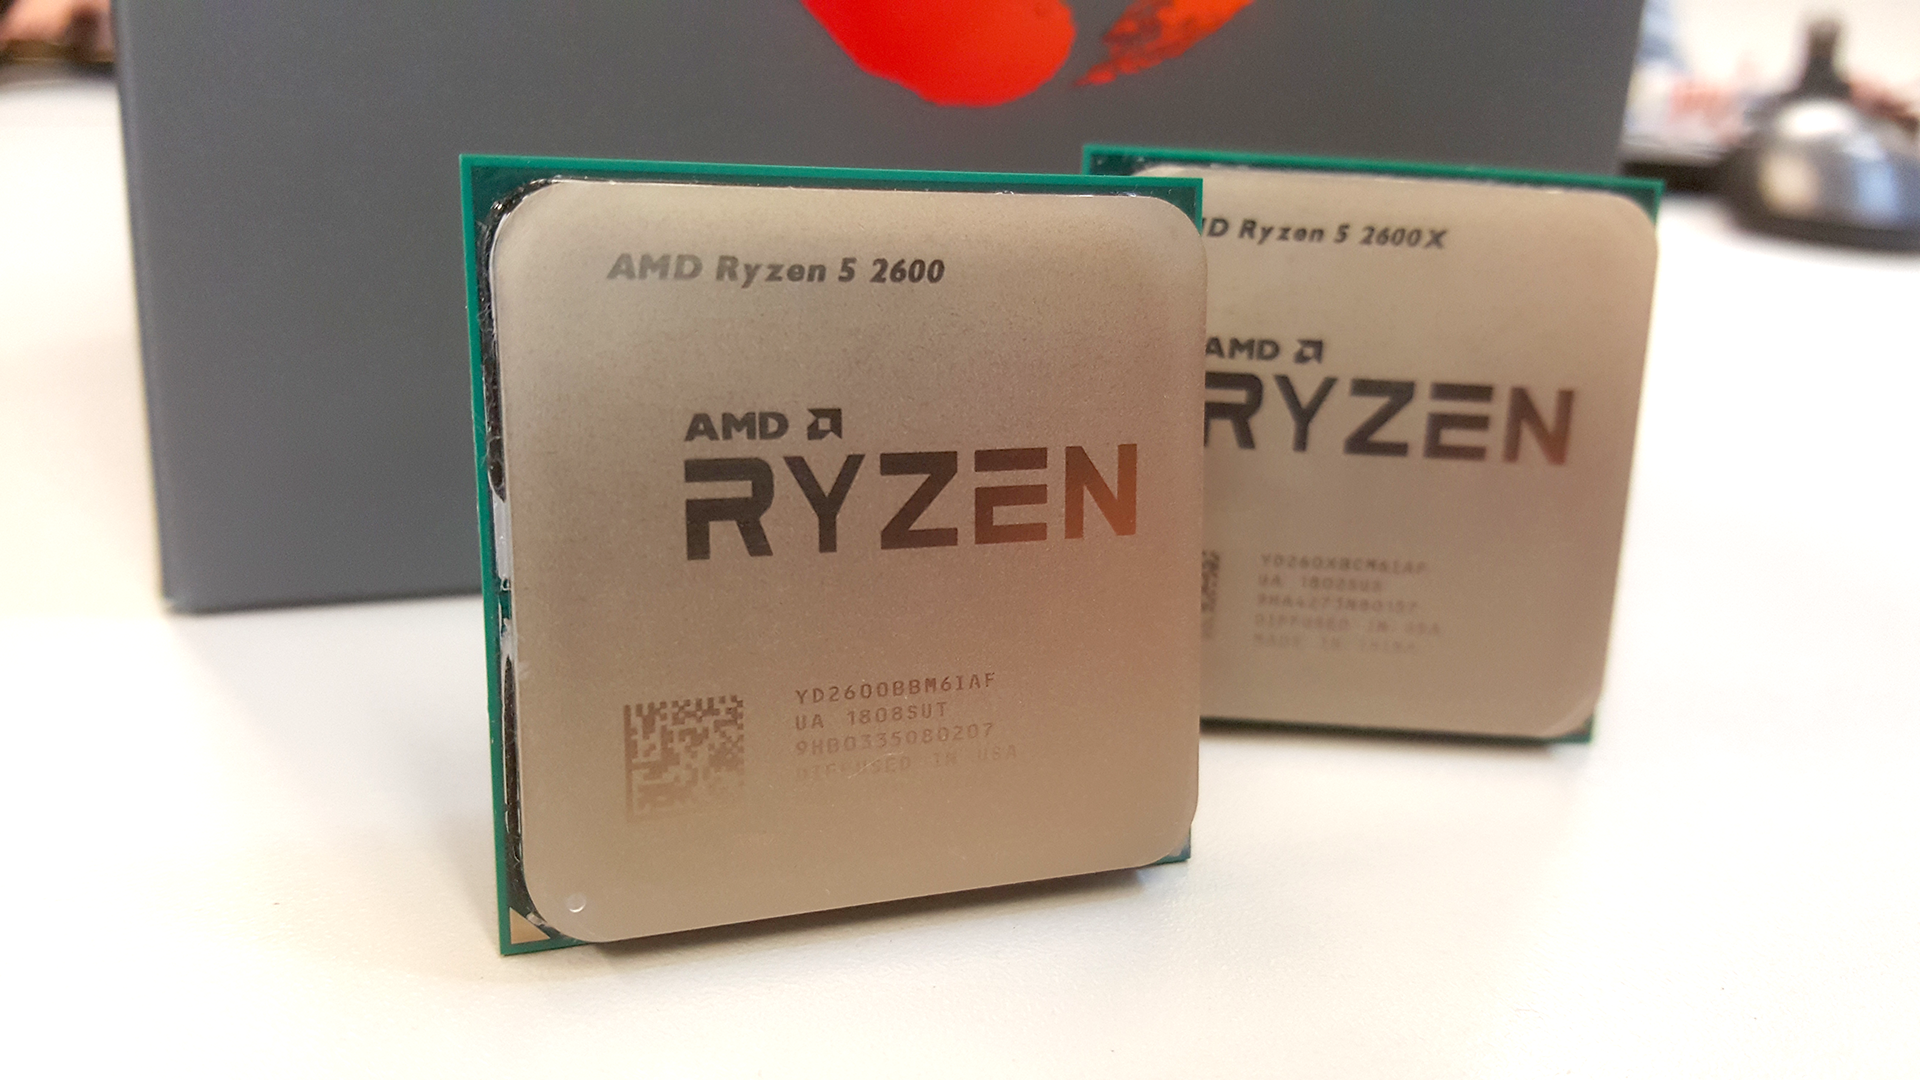 What’s the Difference Between AMD Ryzen Processors and AMD Ryzen PRO Processors?